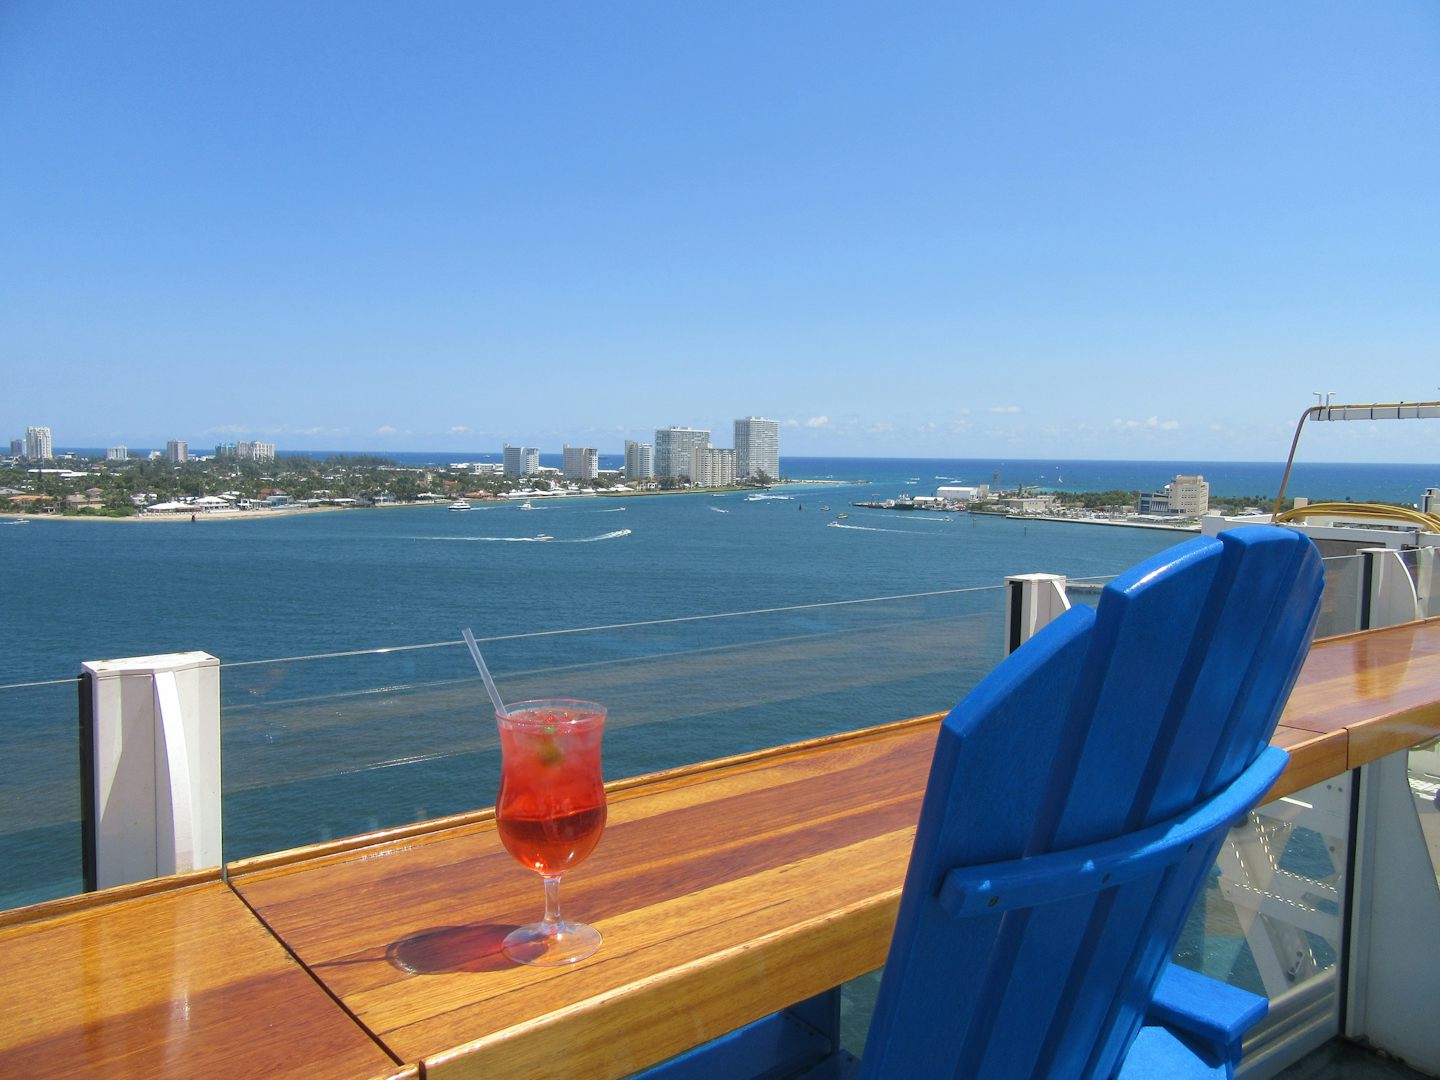 Drink with view of Ft. Lauderdale